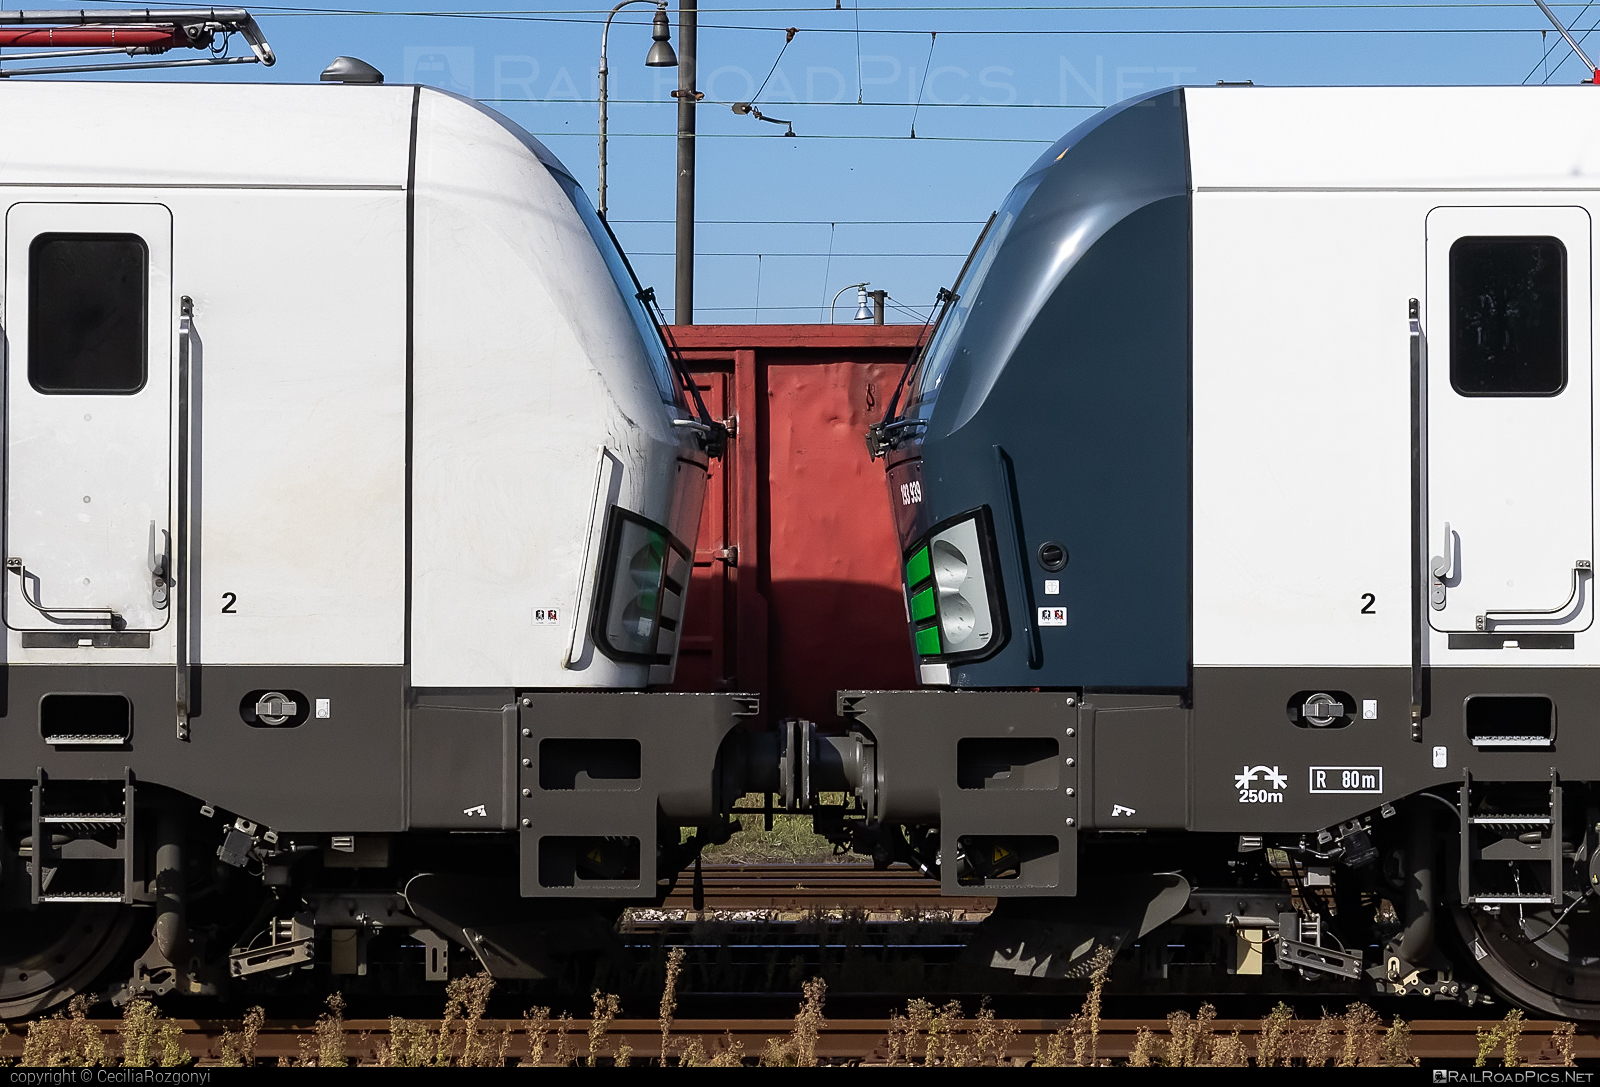 Siemens Vectron MS - 193 939 operated by LTE Logistik und Transport GmbH #ell #ellgermany #eloc #europeanlocomotiveleasing #lte #ltelogistikundtransport #ltelogistikundtransportgmbh #siemens #siemensVectron #siemensVectronMS #vectron #vectronMS